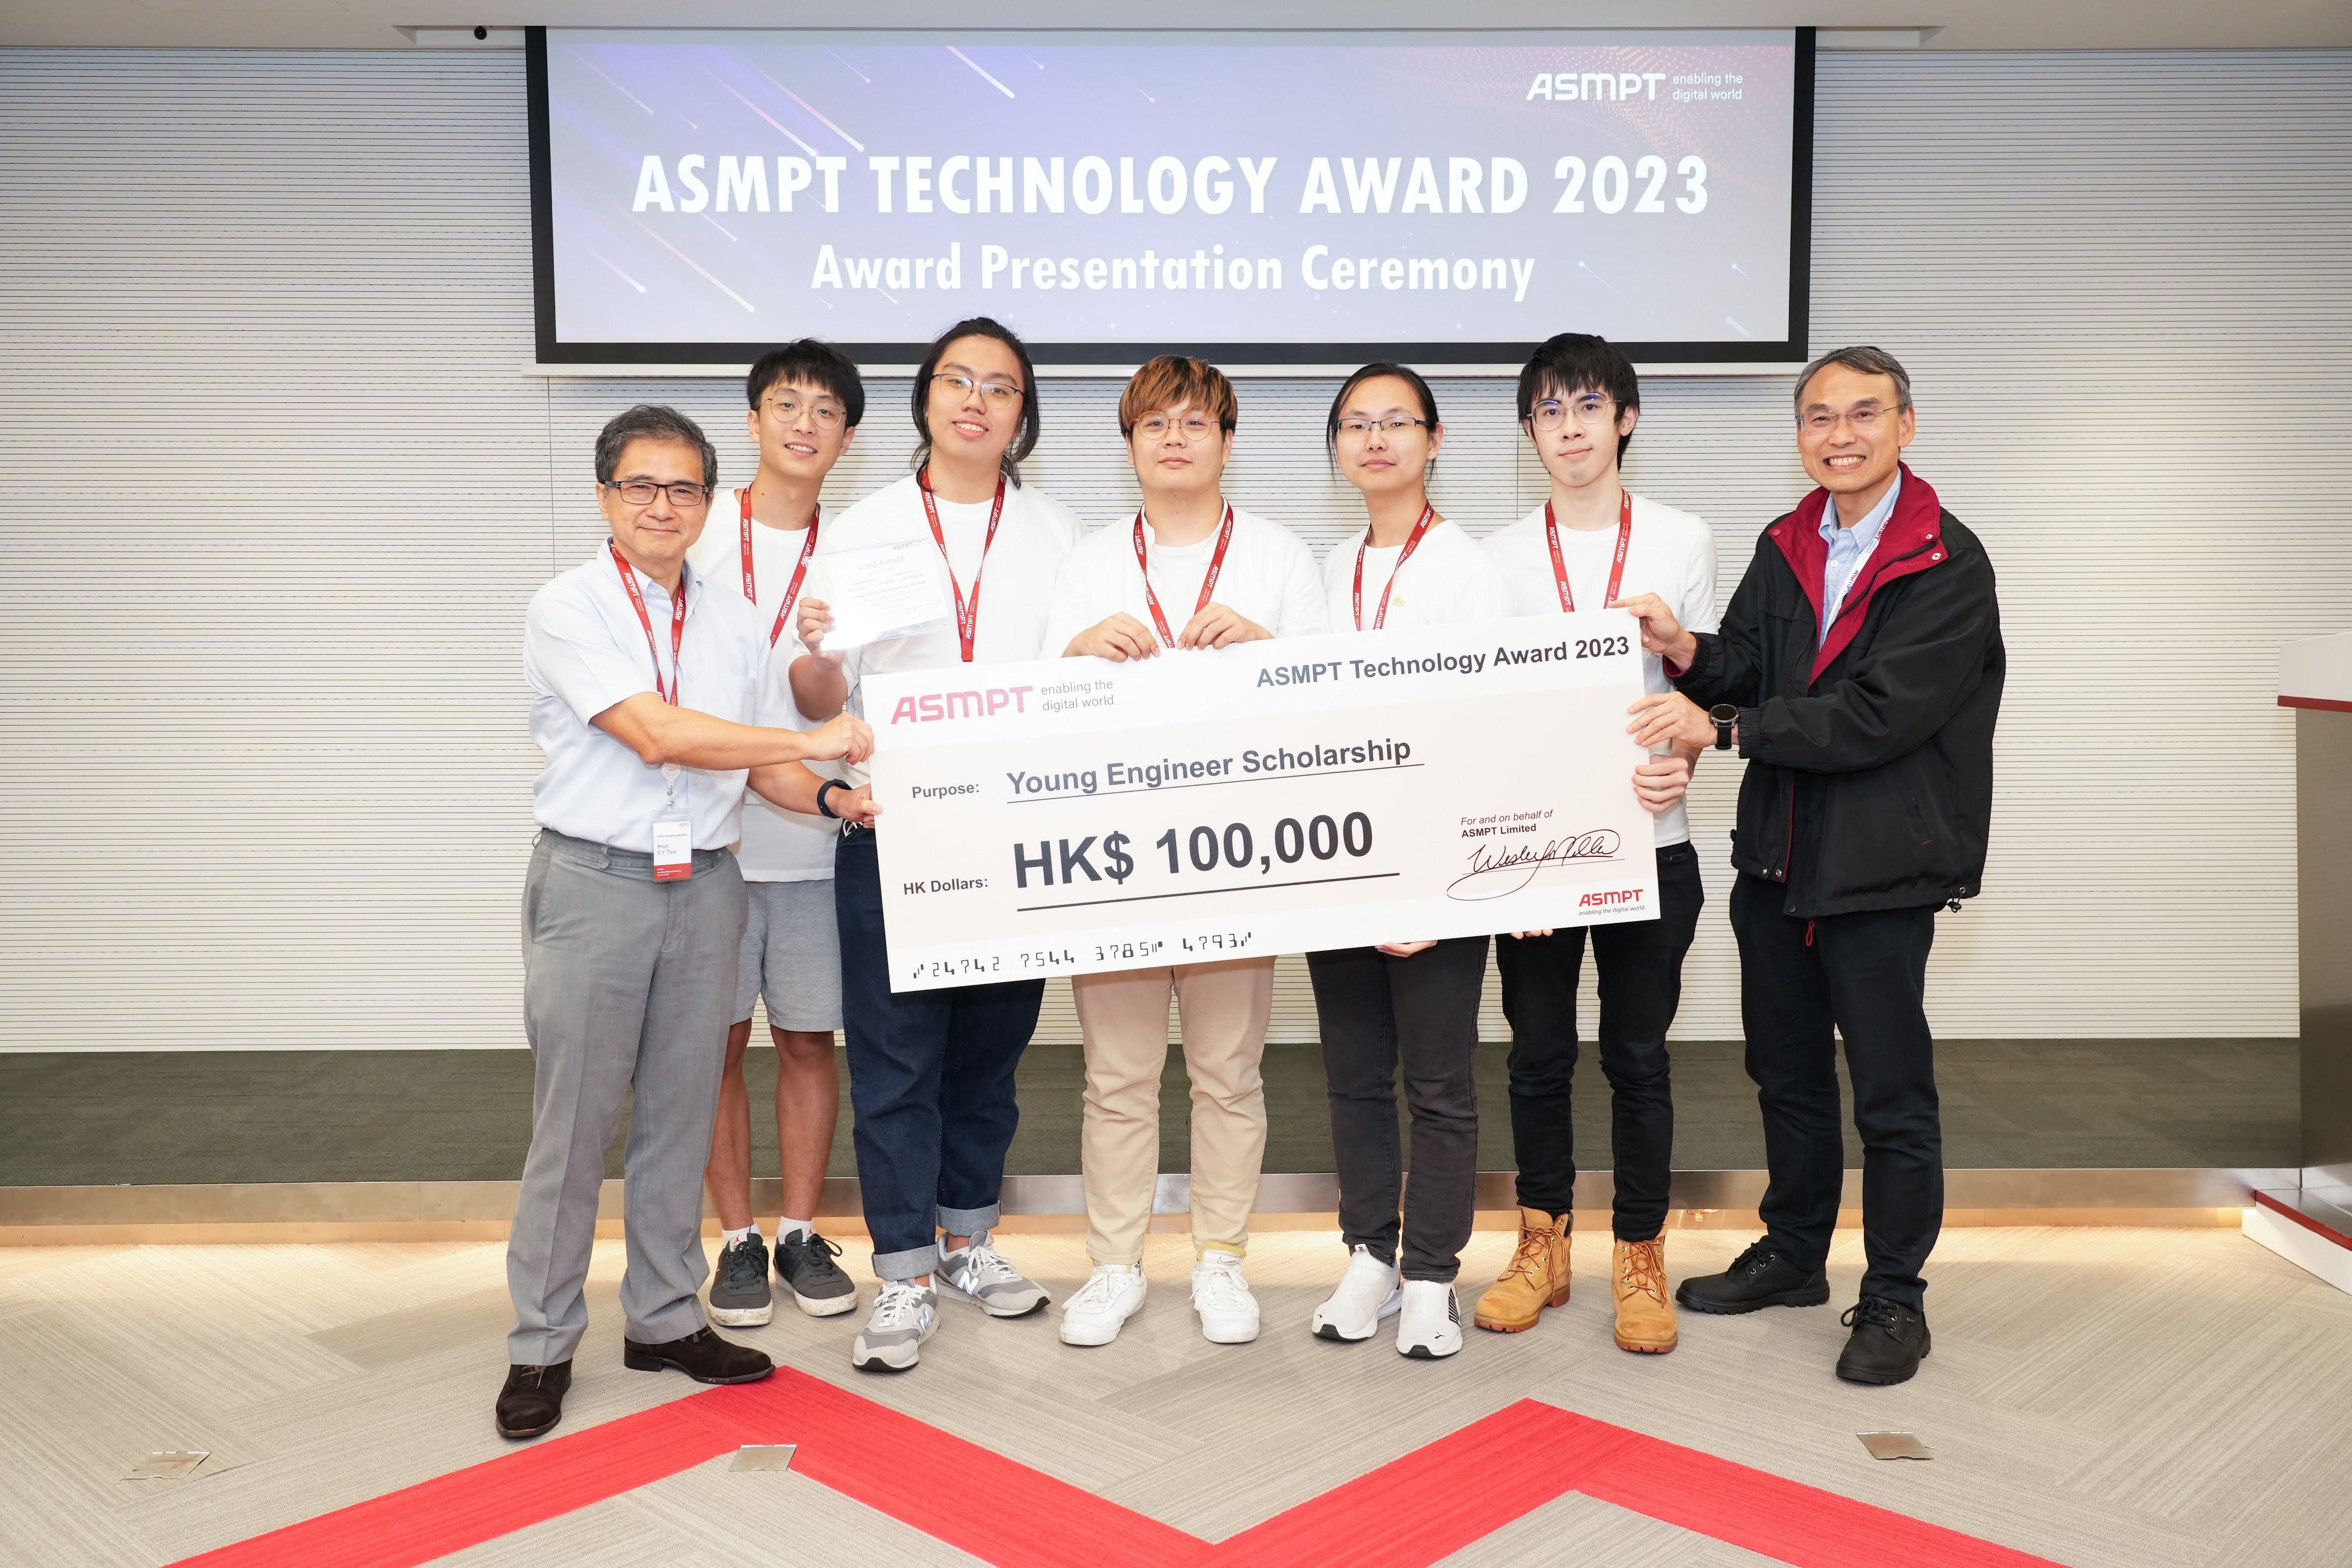 (From left) Prof. Tsui Chi-Ying, Head of Division of Integrative Systems and Design (ISD), ISD students Will Liu Pak-Hin, Evan Ma Sze-Long, Benny Sze Chung-Lam, Alan Pang Yu-Yin and Alphor Cheung Ho-Hin, as well as a representative from ASMPT at the ceremony of the ASMPT Technology Award 2023 on July 7